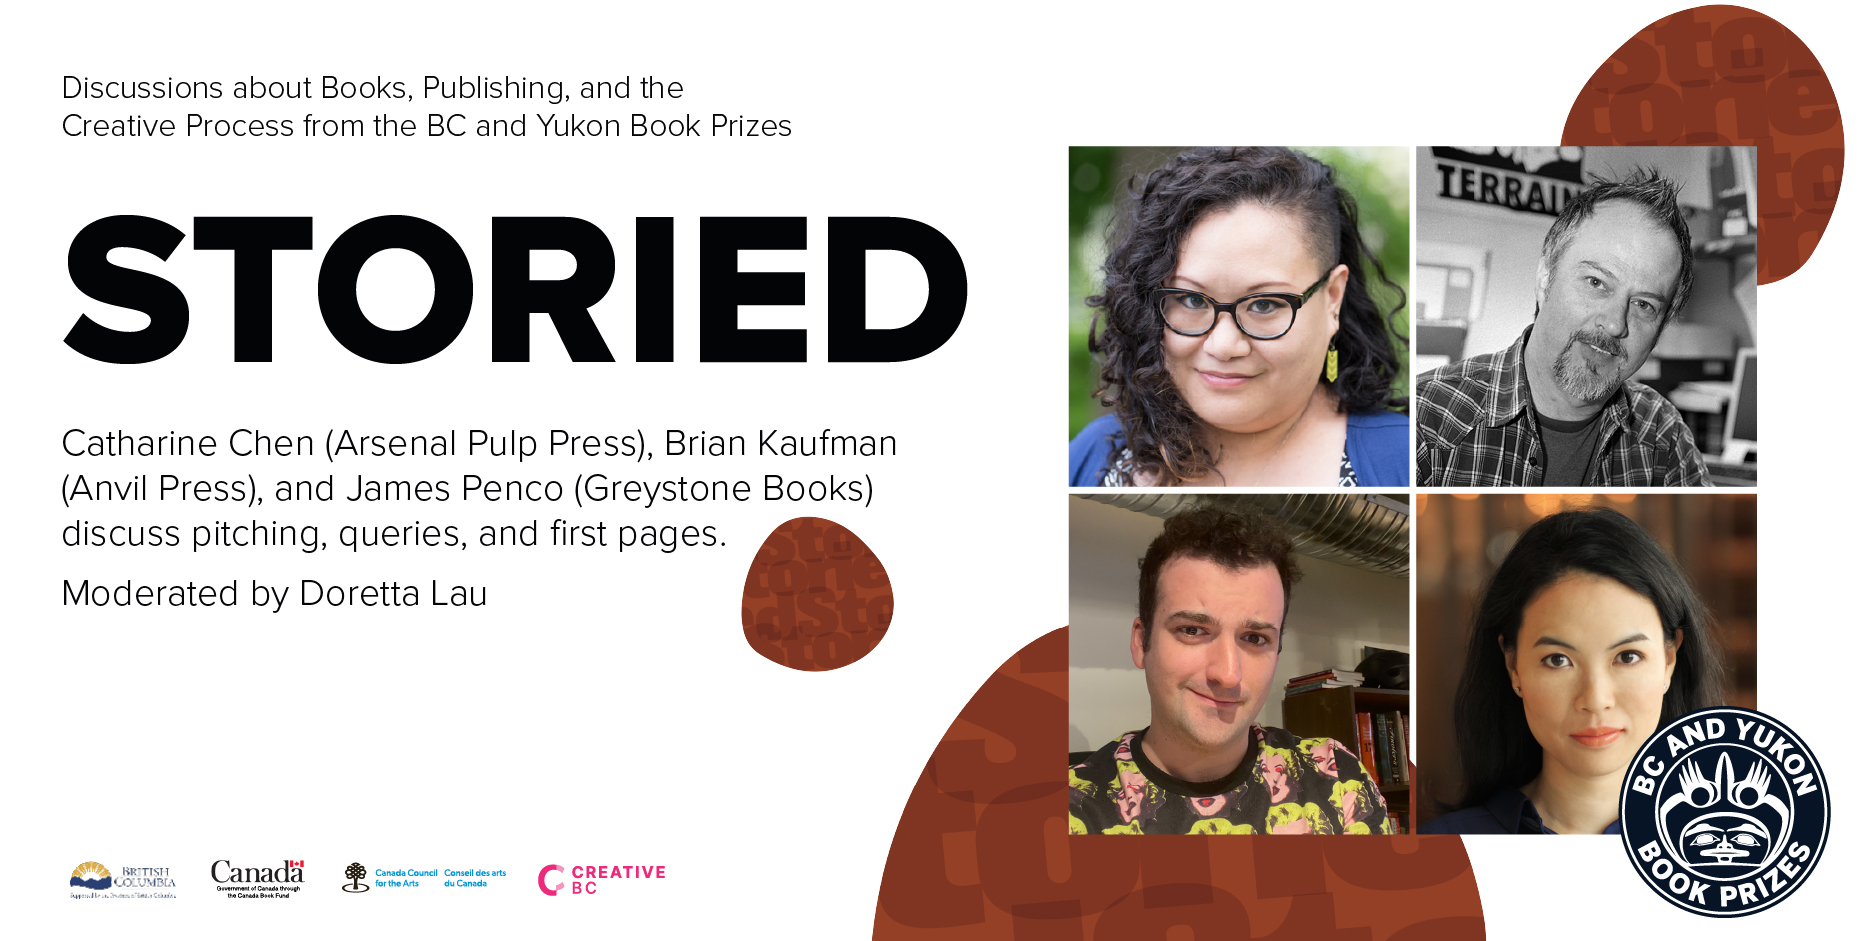 Storied: On pitches, queries, and first pages with editors and publishers from Arsenal Pulp Press, Anvil Press, and Greystone Books, moderated by Doretta Lau